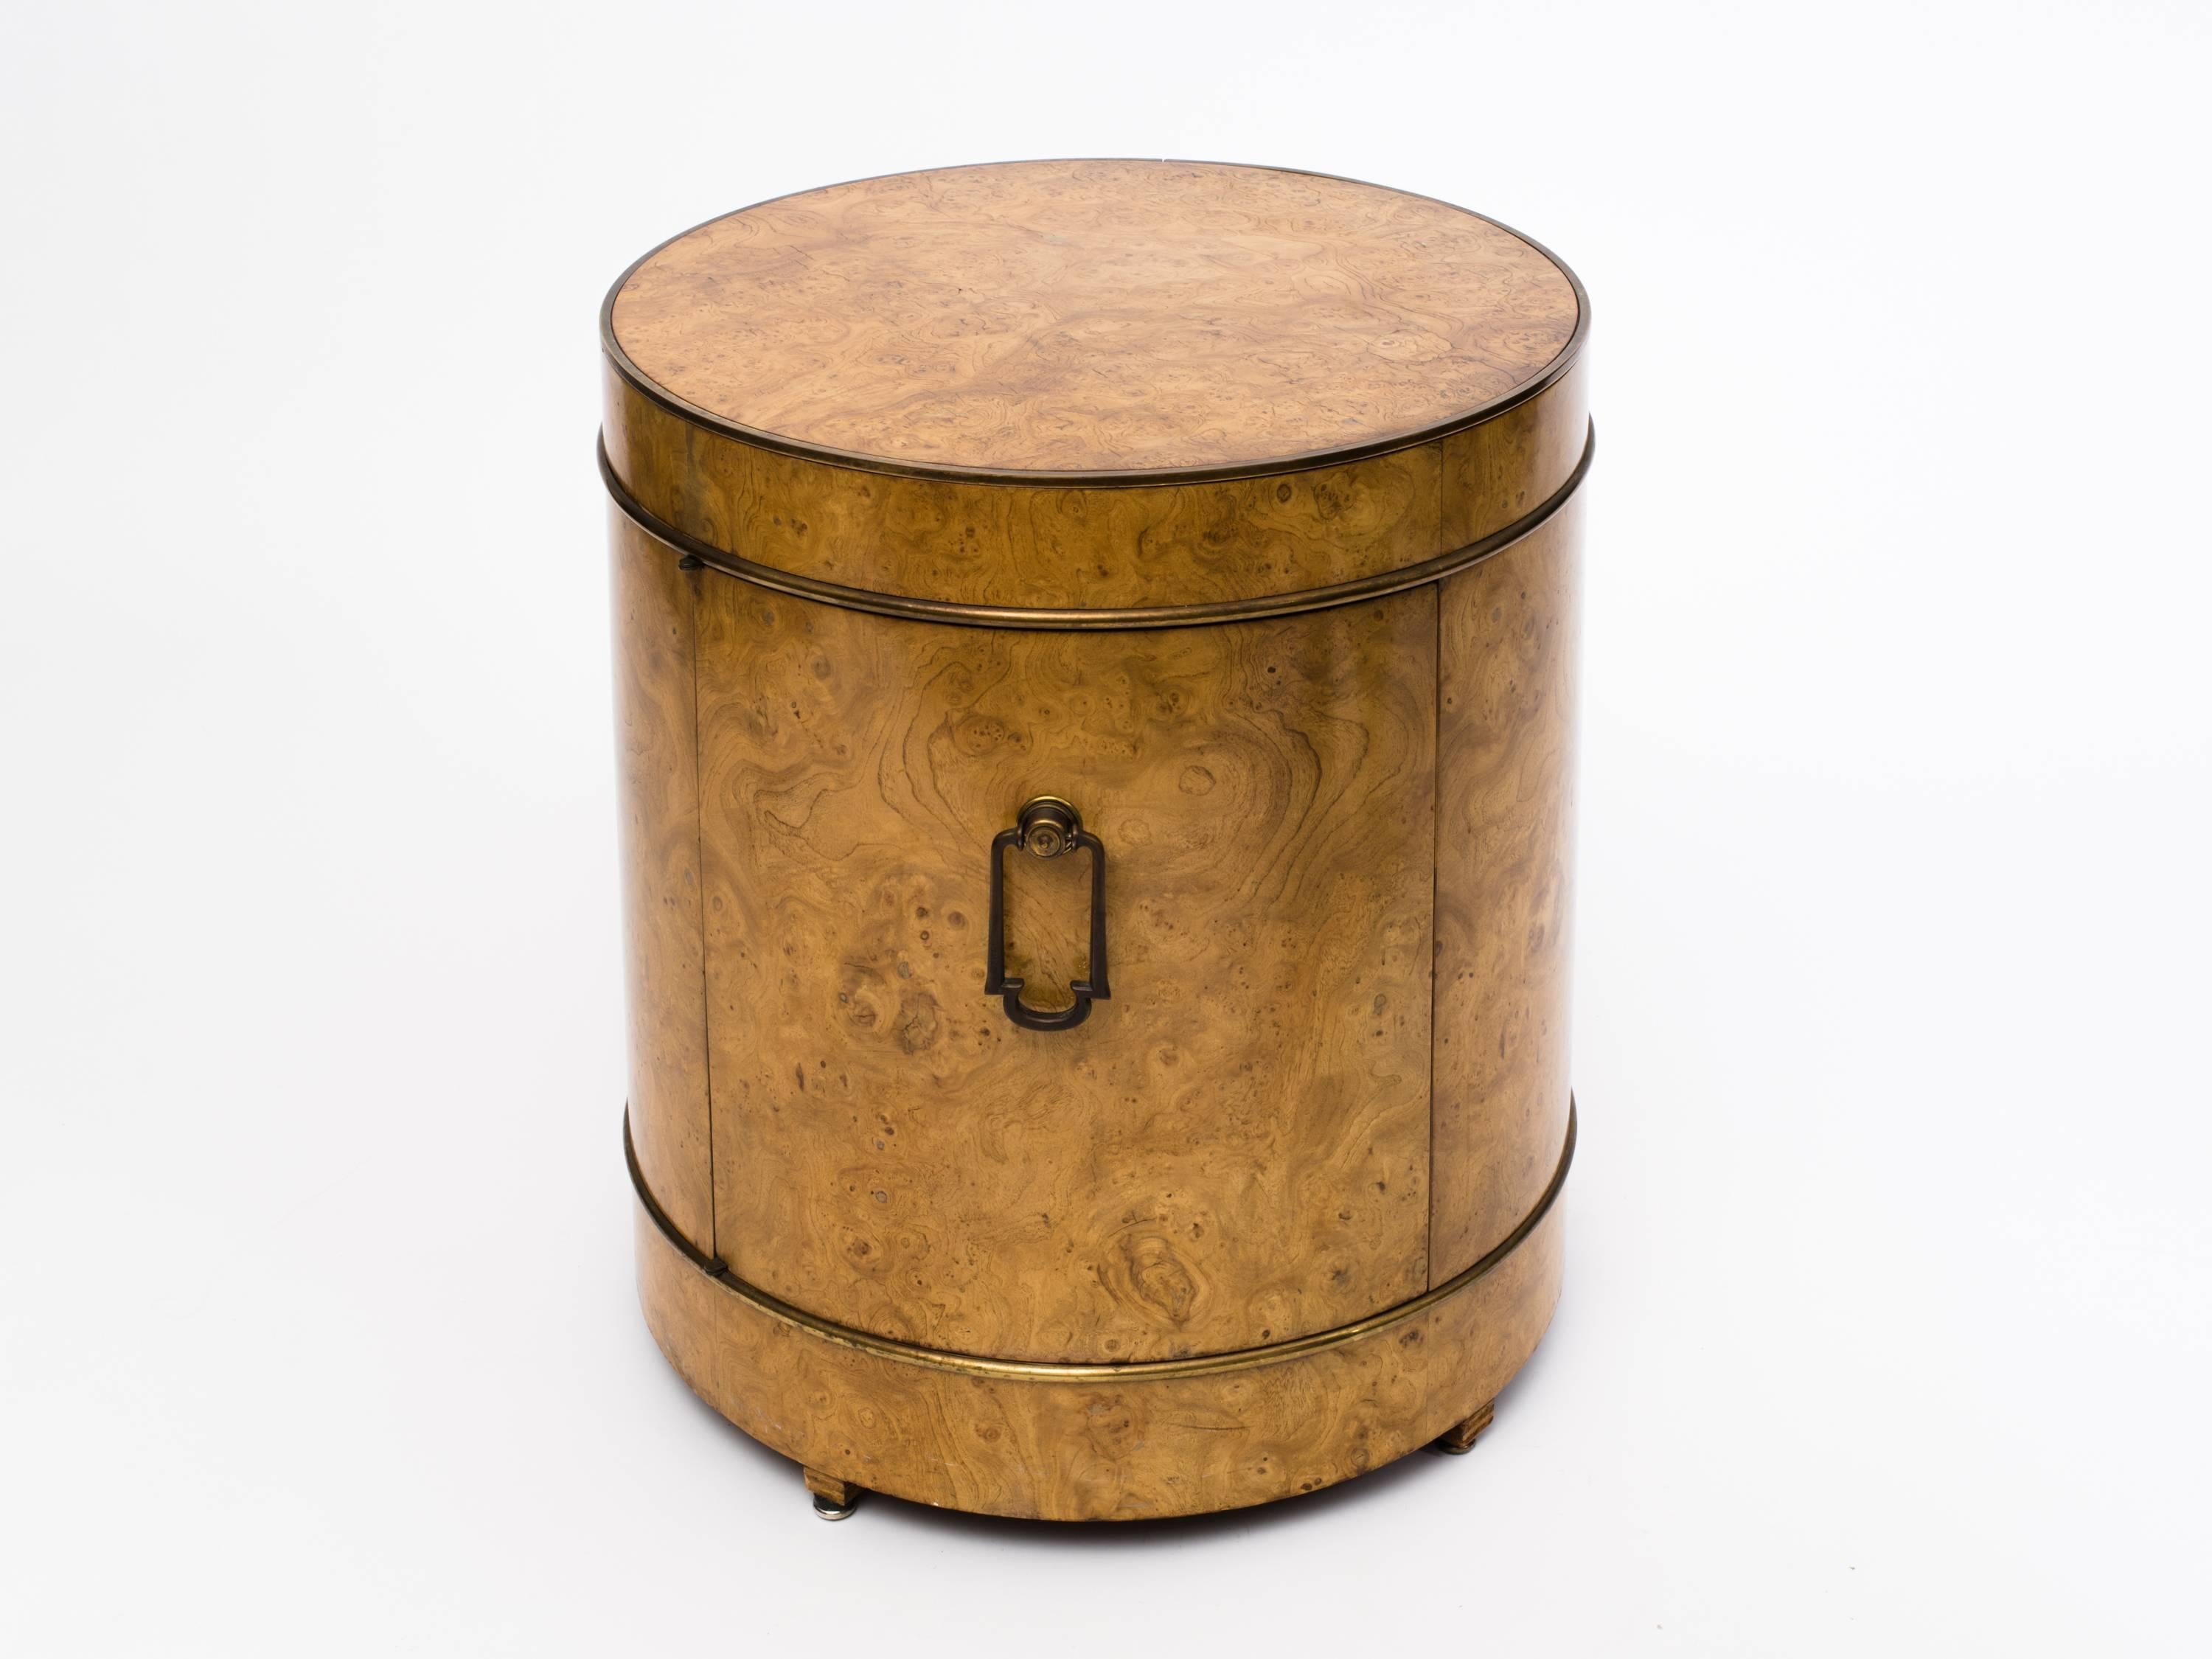 Rich burl wood drum bar cabinet with brass piping detail and heavy brass door pull. Designed by Bernhard Rohne for Mastercraft, circa 1970s.